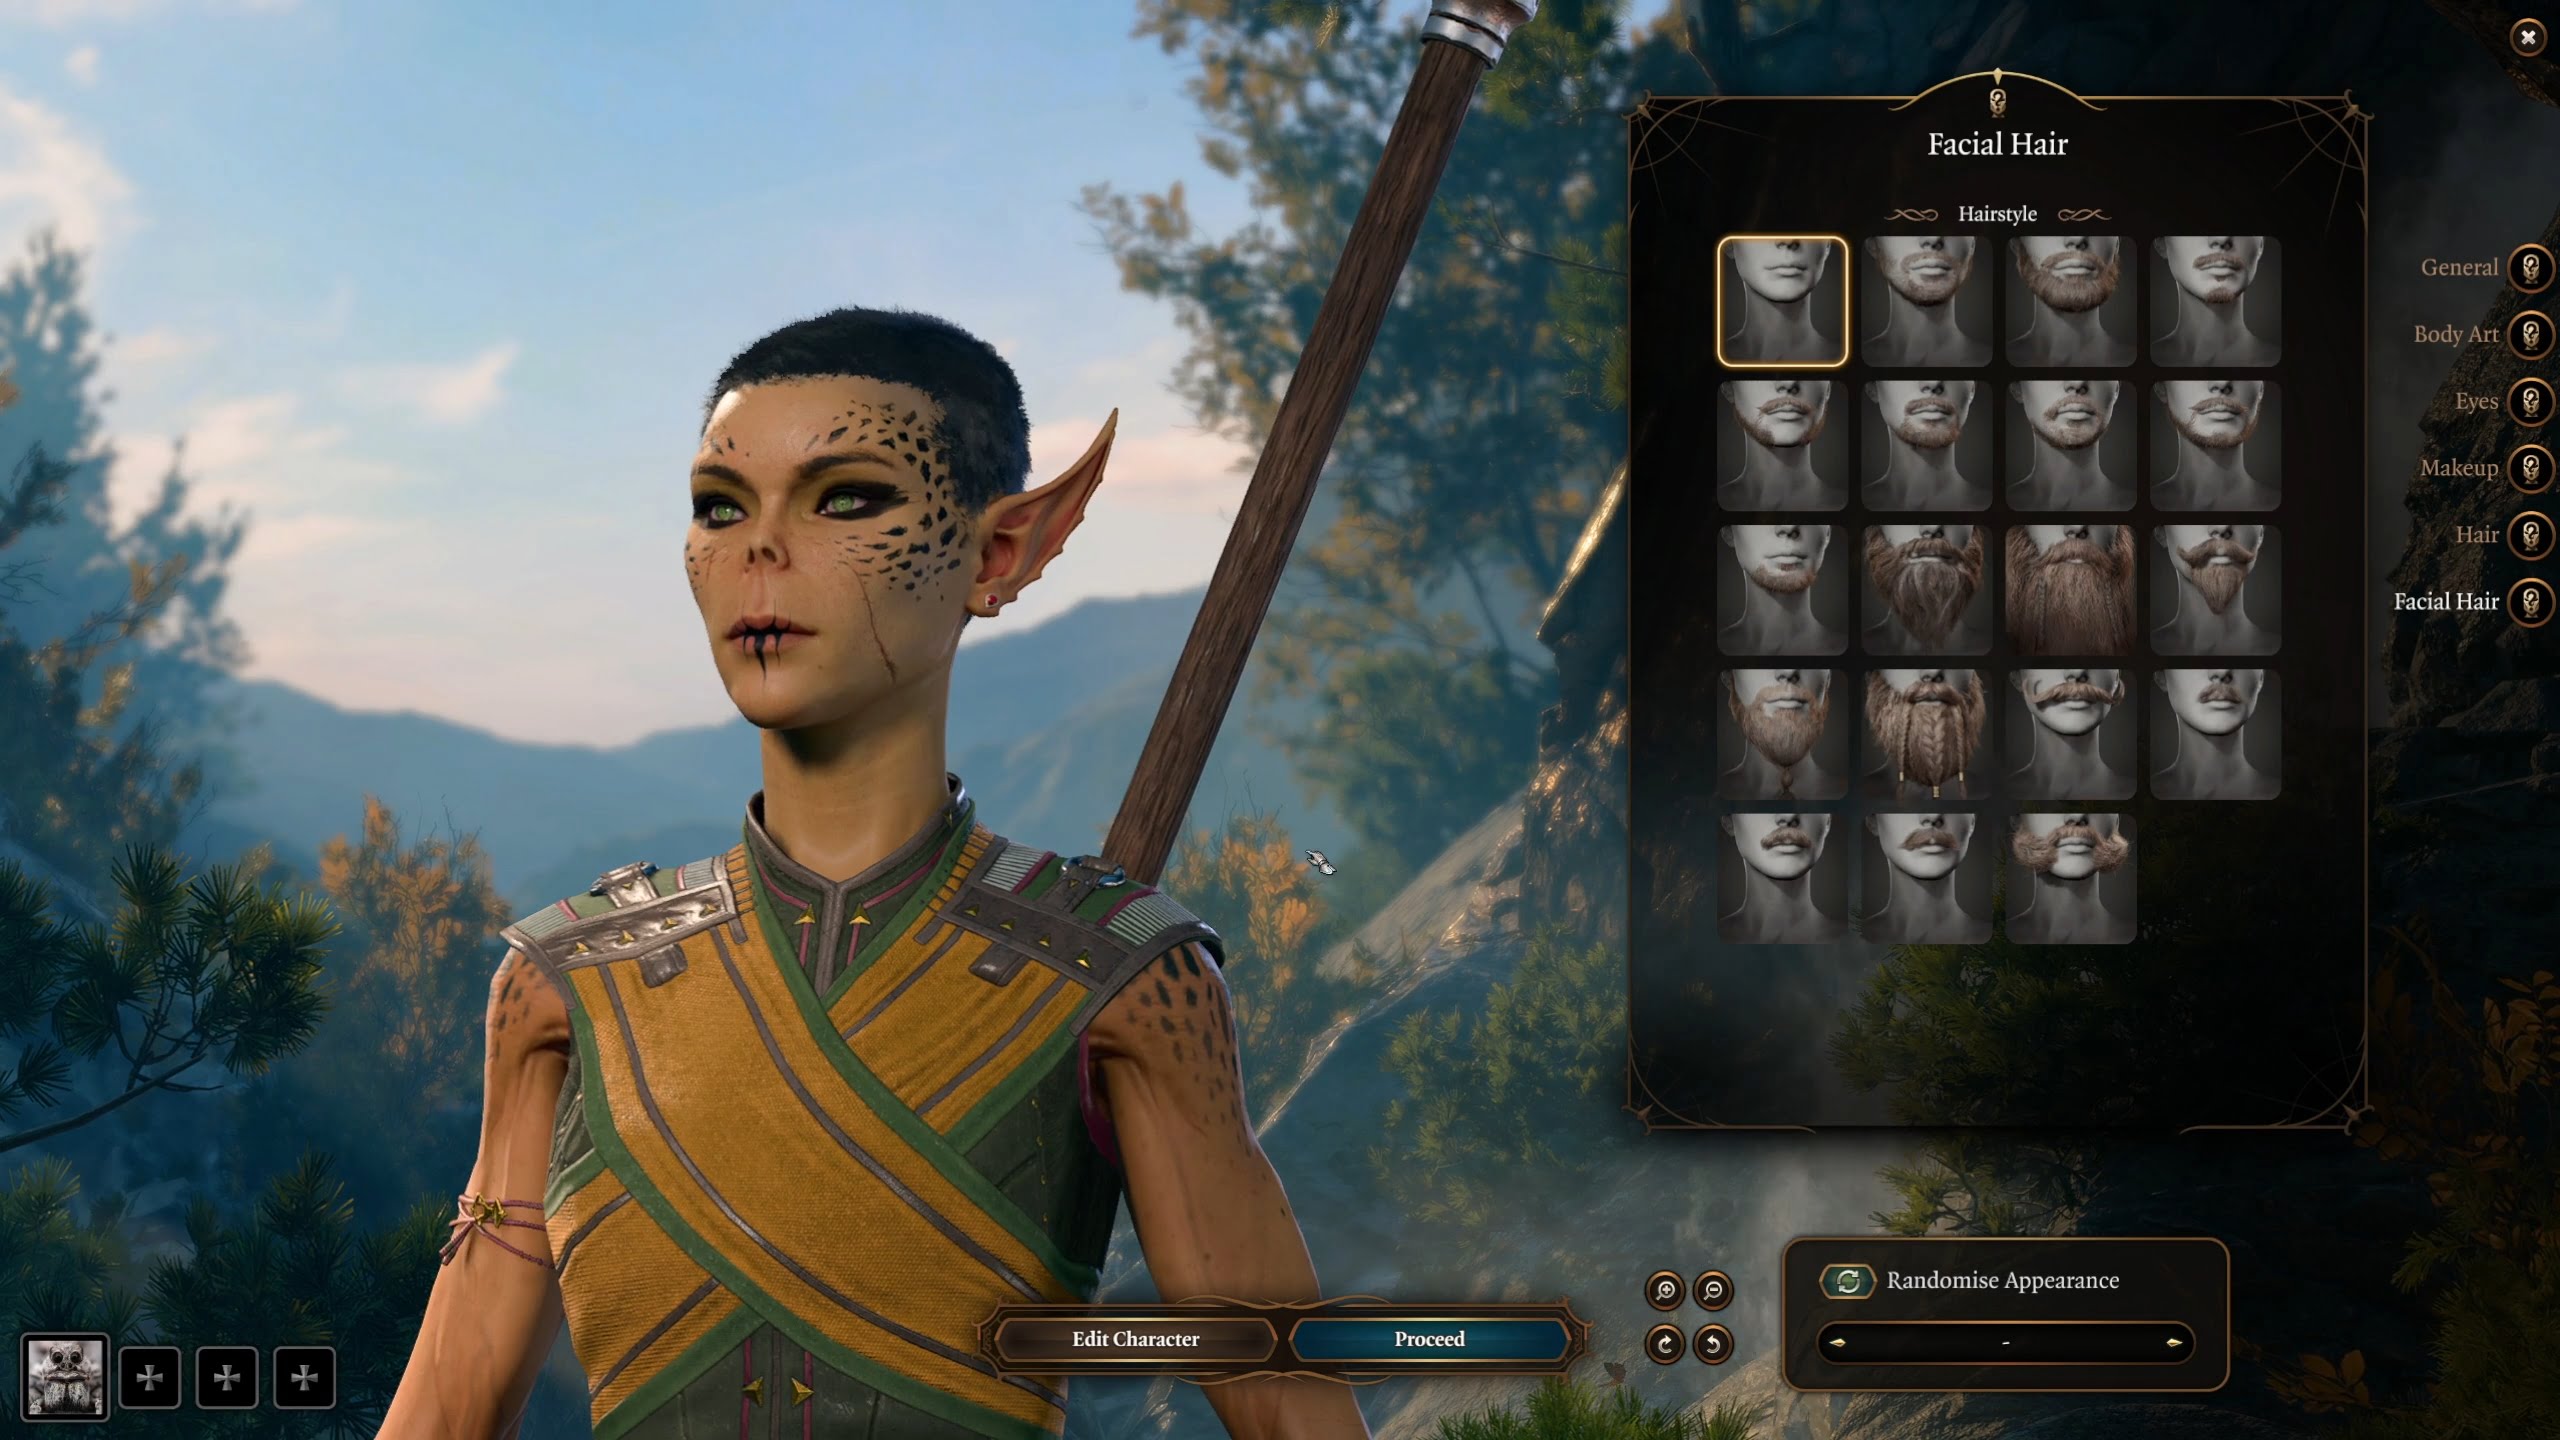 baldur's gate 3 character recustomization might be coming featured image